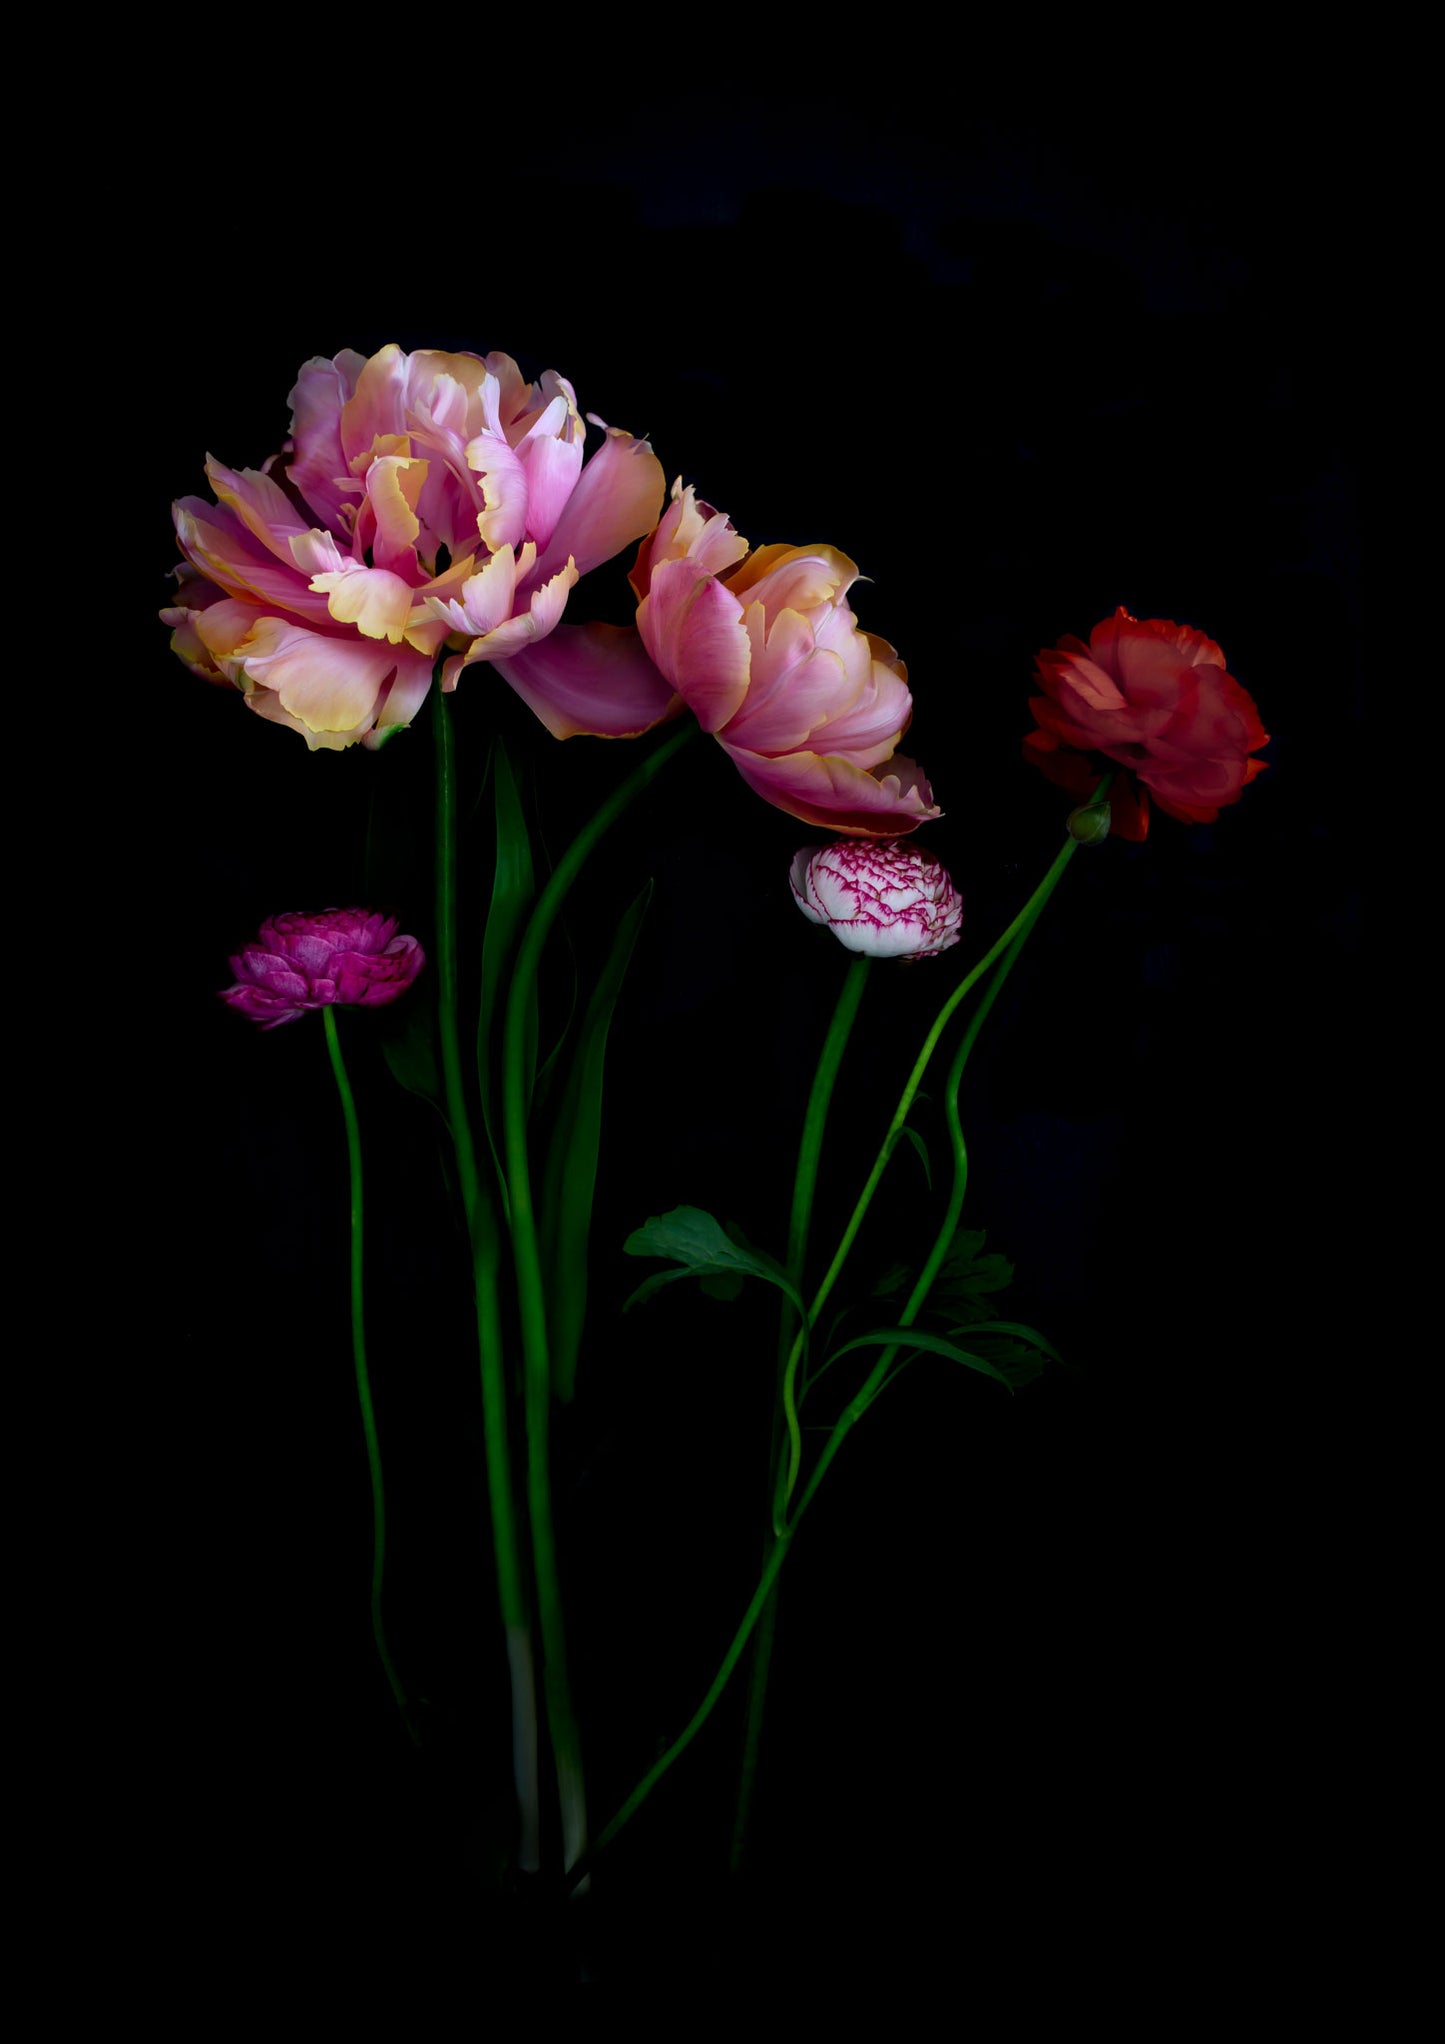 Botanical print of pink double Tulips with red and pink Ranunculus on a black background, created buy UK Art photographer